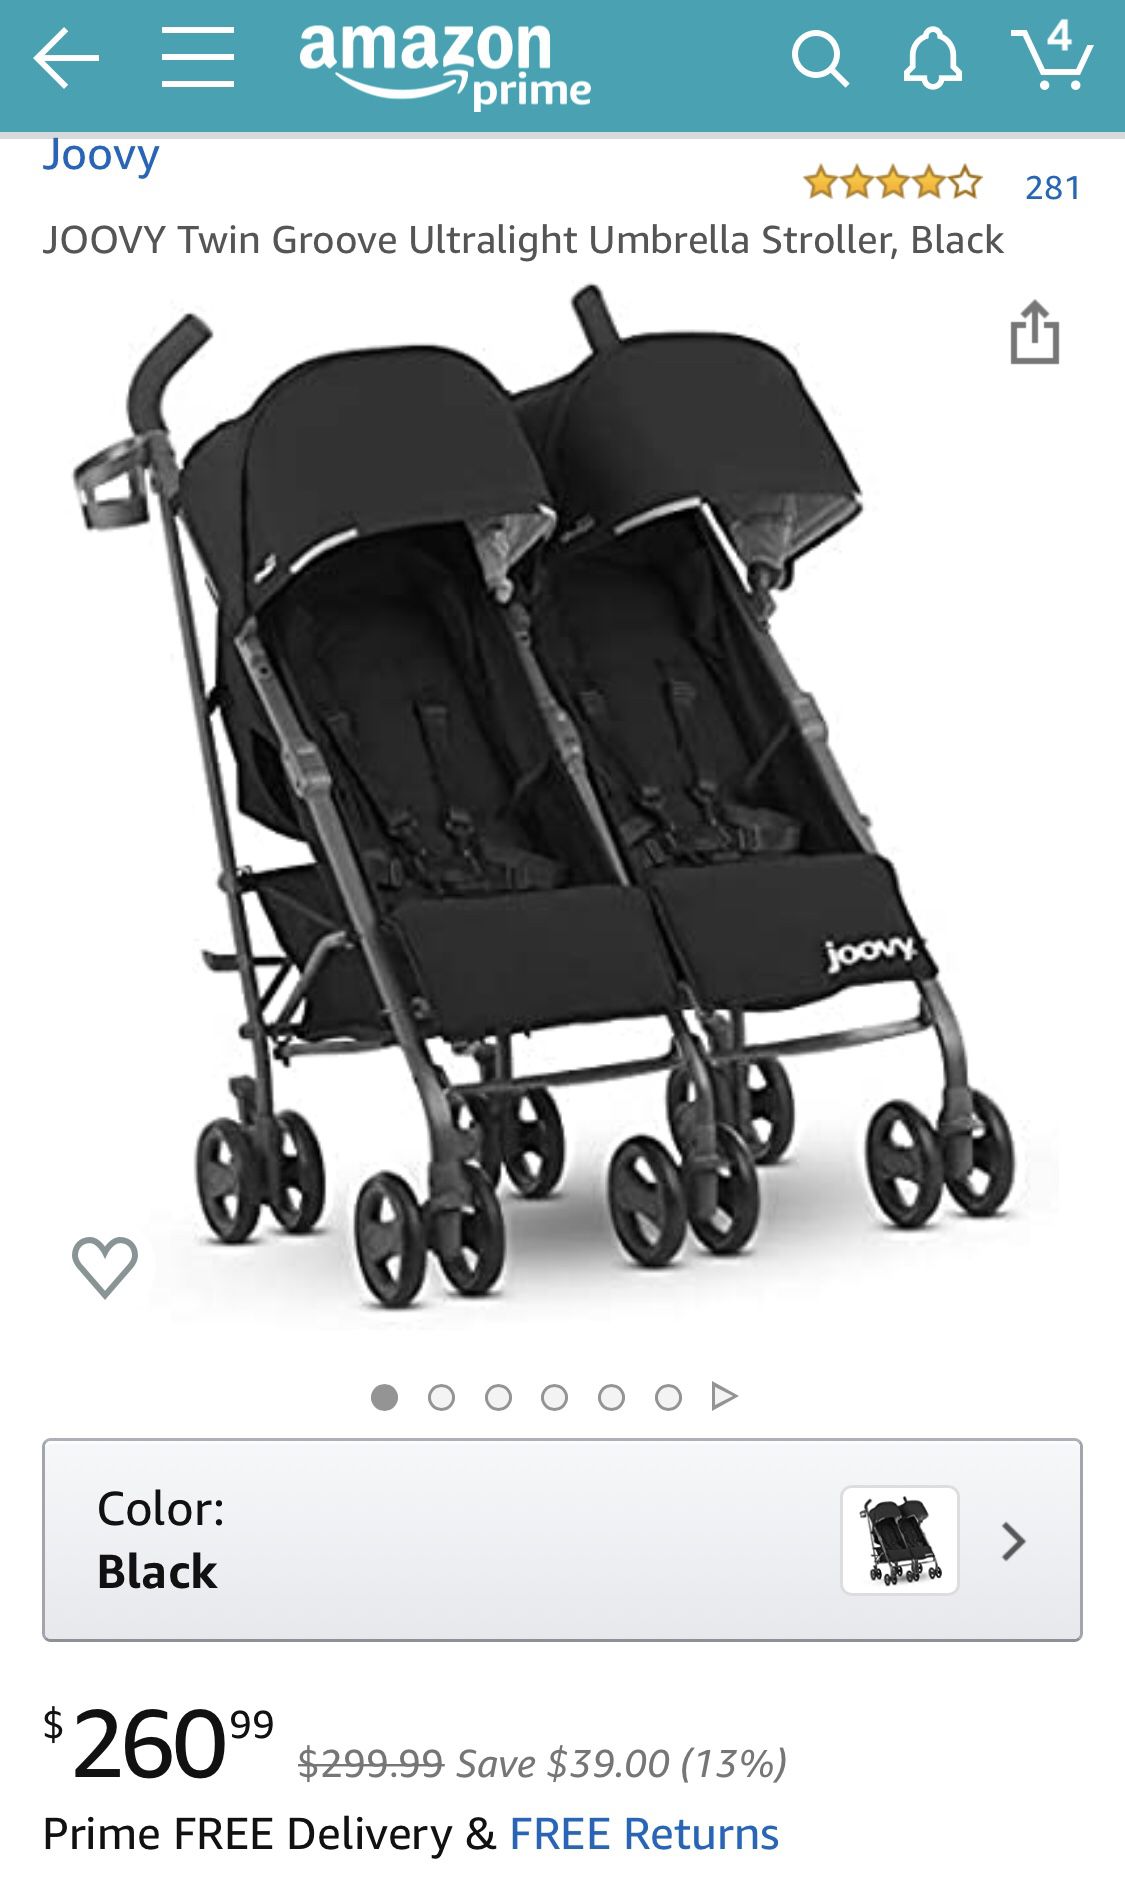 Joovy Twin Groove Ultralight Umbrella Stroller Twice the Space, Not the Trouble A double stroller shouldn’t be so bulky you don’t even want to use it